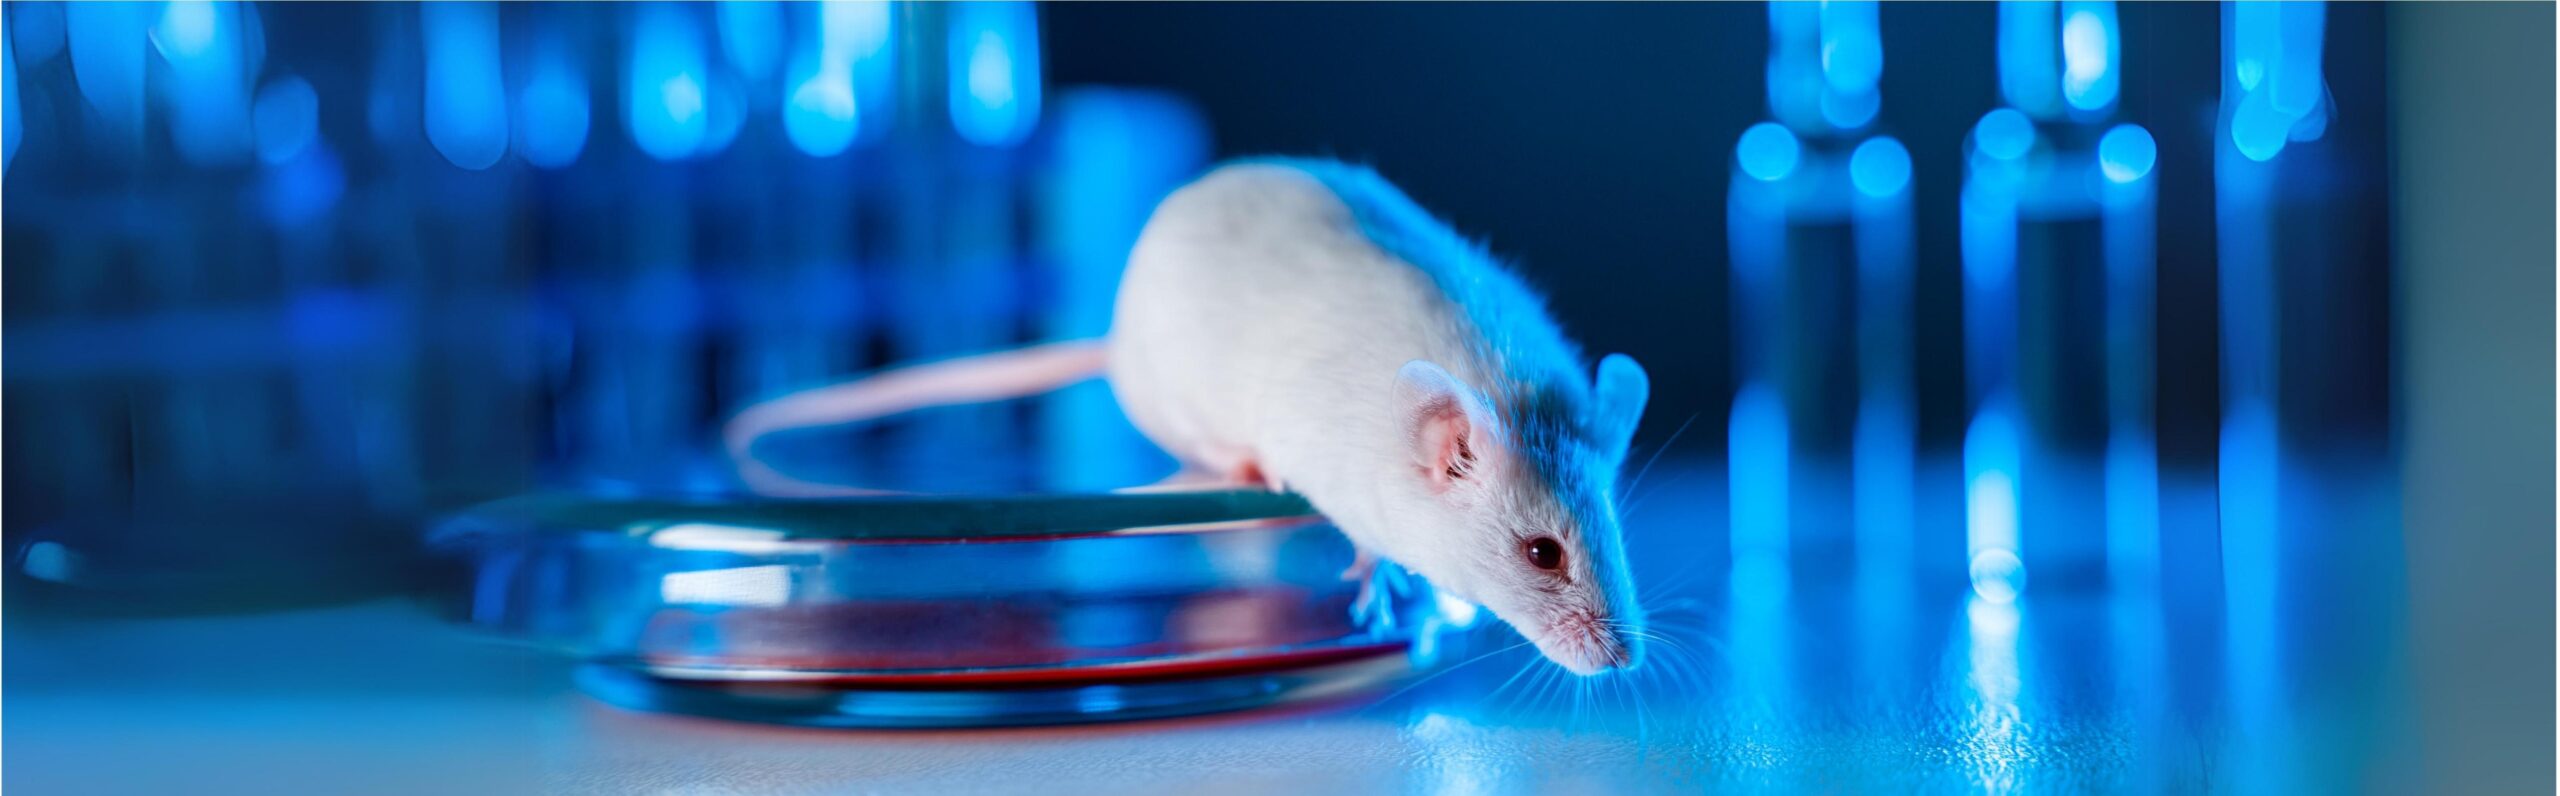 A white mouse is sitting on a cultural medium. Laboratory test tubes in the background.